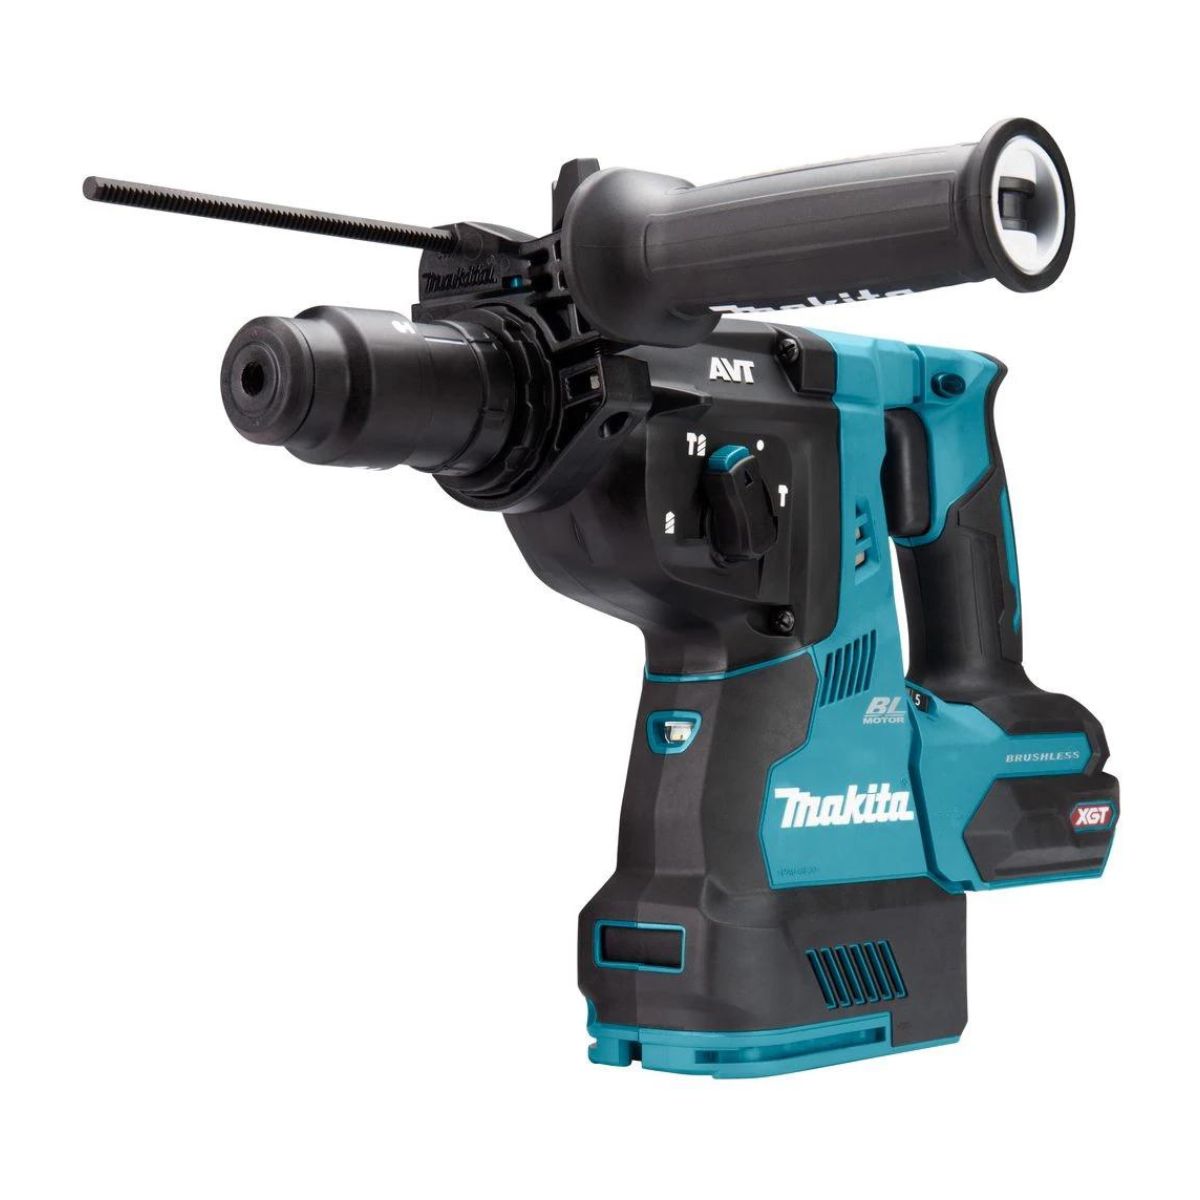 Makita HR004GZ02 40Vmax XGT Brushless SDS Plus Rotary Hammer Drill Body Only with Case